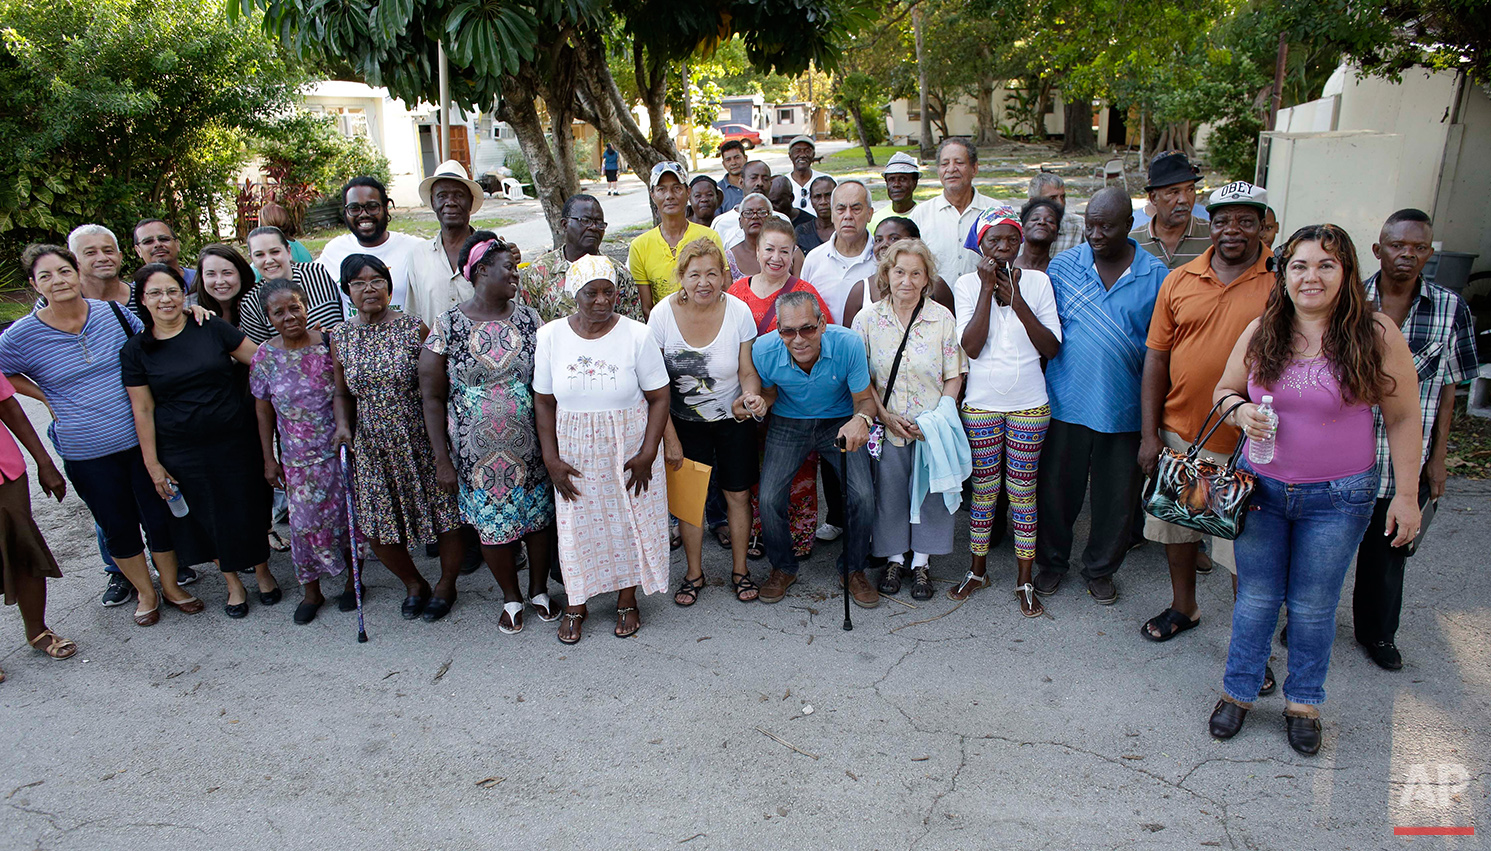  In this Tuesday, June 14, 2016 photo, residents of the Little Farm trailer park pose for a group photo in El Portal, Fla. The 15-acre neighborhood was home to a close-knit community until the site was purchased by Wealthy Delight LLC, and residents 